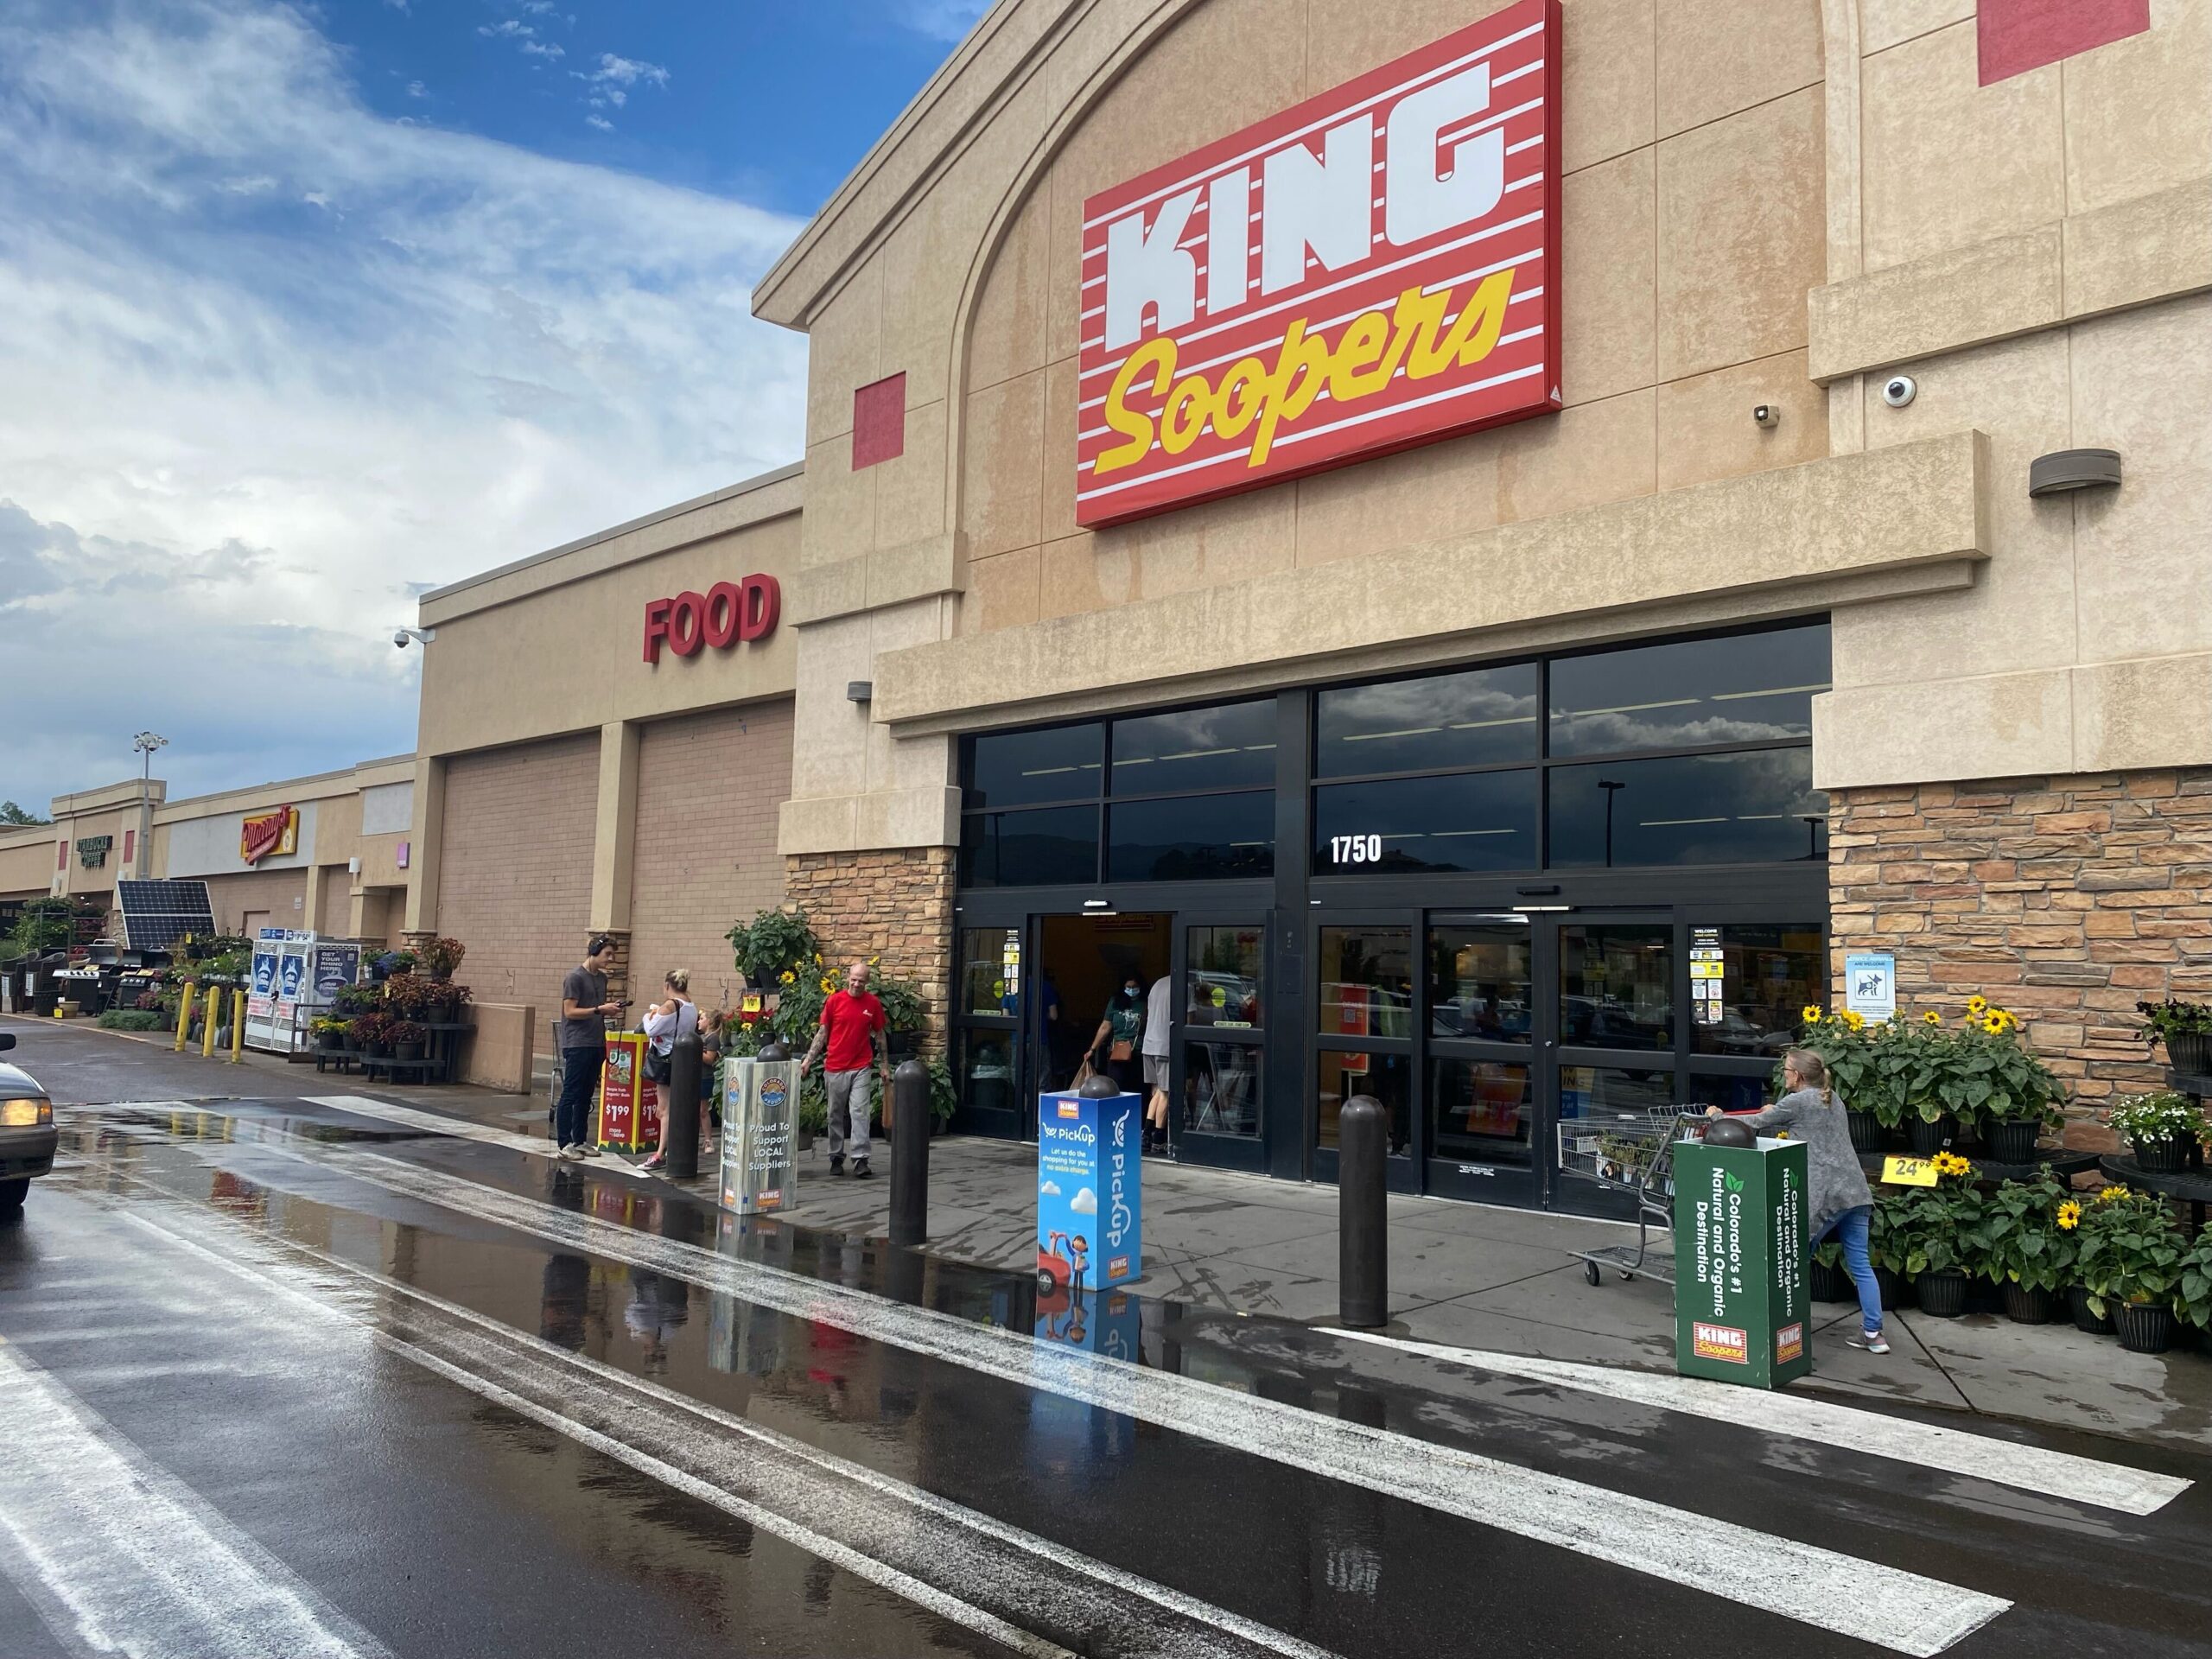 A photo of a King Soopers market in Colorado Springs.